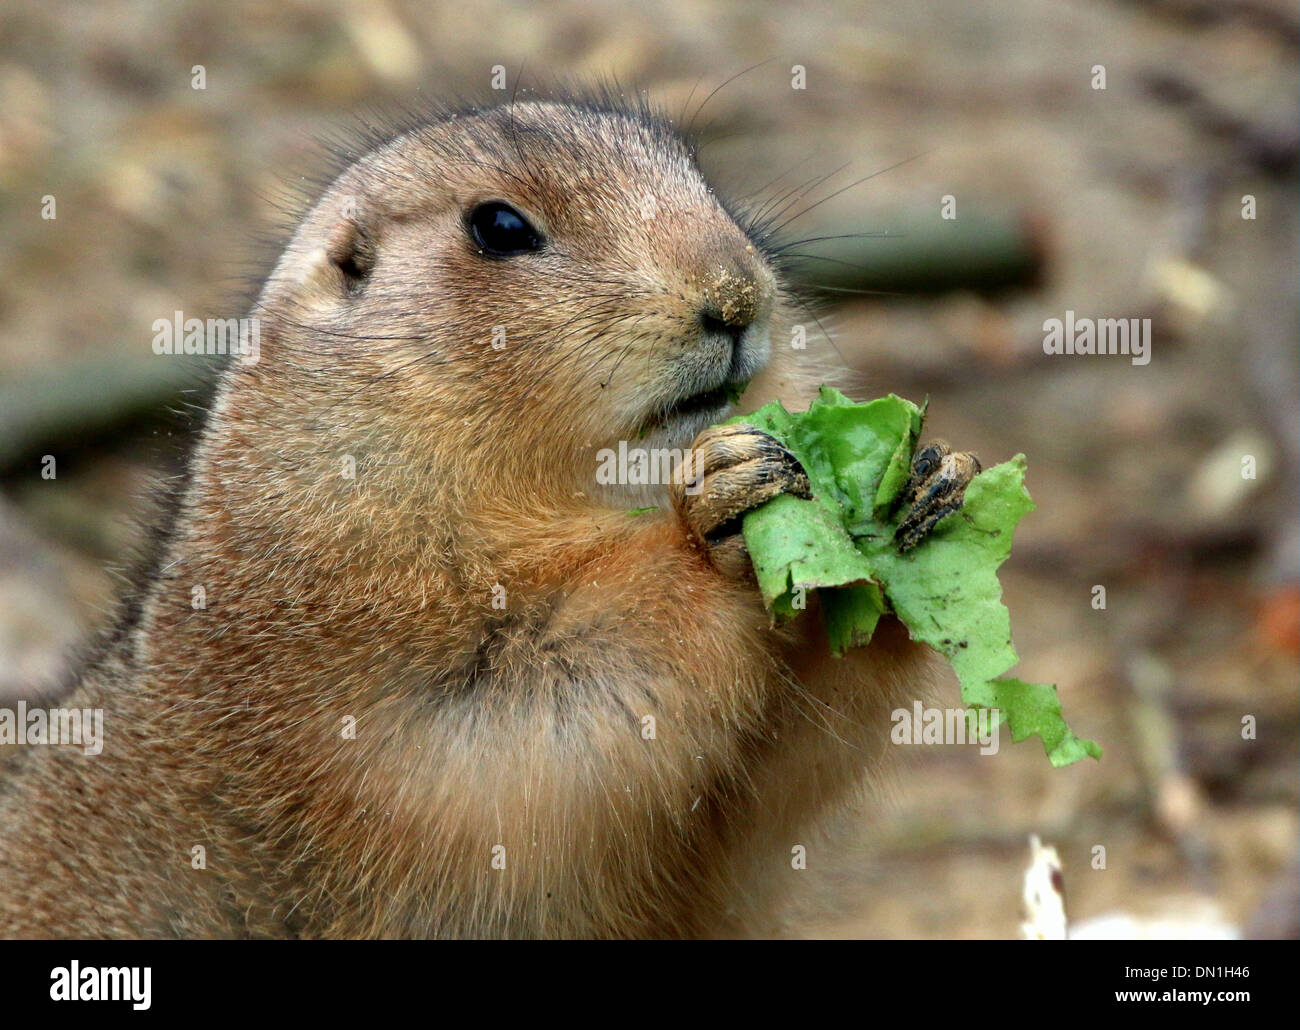 Black-tailed prairie dog (Cynomys ludovicianus) in a zoo setting eating lettuce Stock Photo